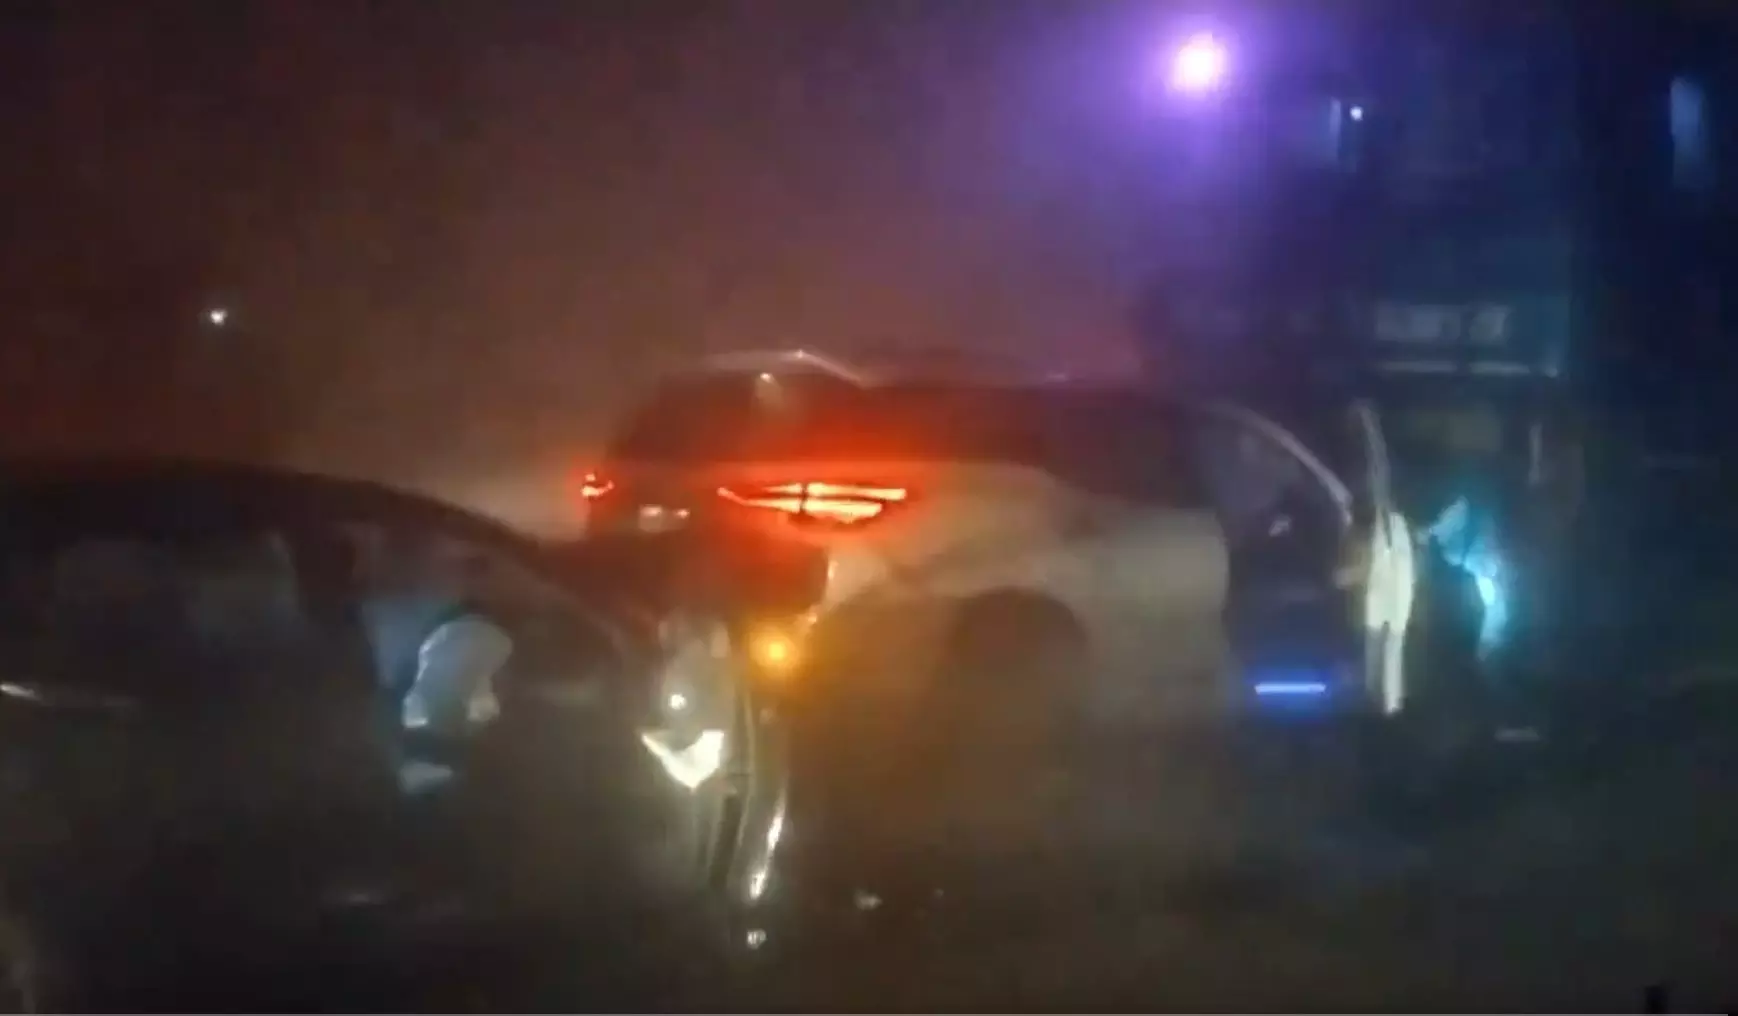 Fog leads to pile-up on Yamuna Expressway in Greater Noida, several hurt